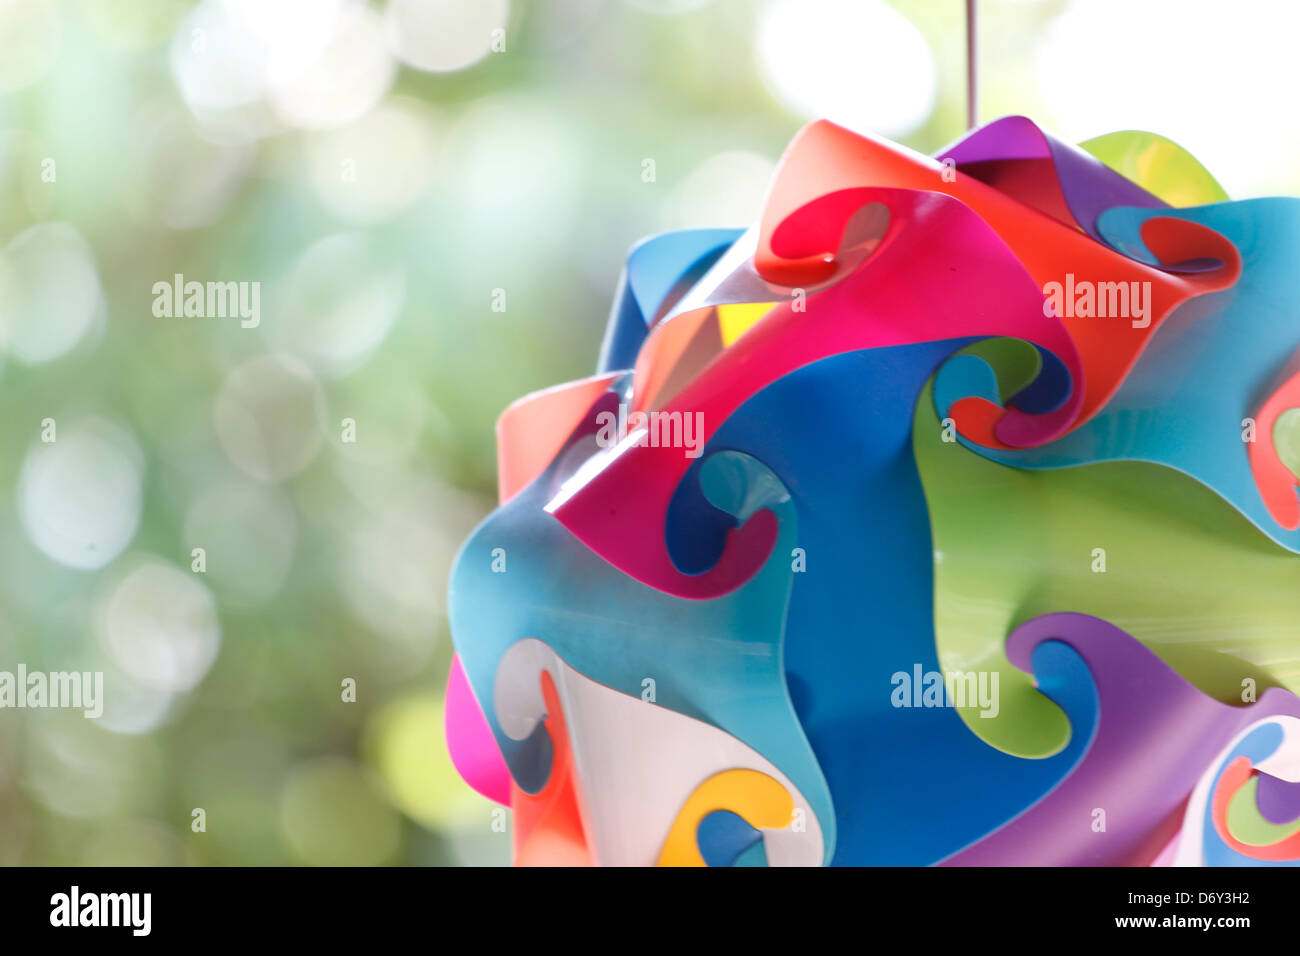 The Lighting Art on design,It's colorful. Stock Photo